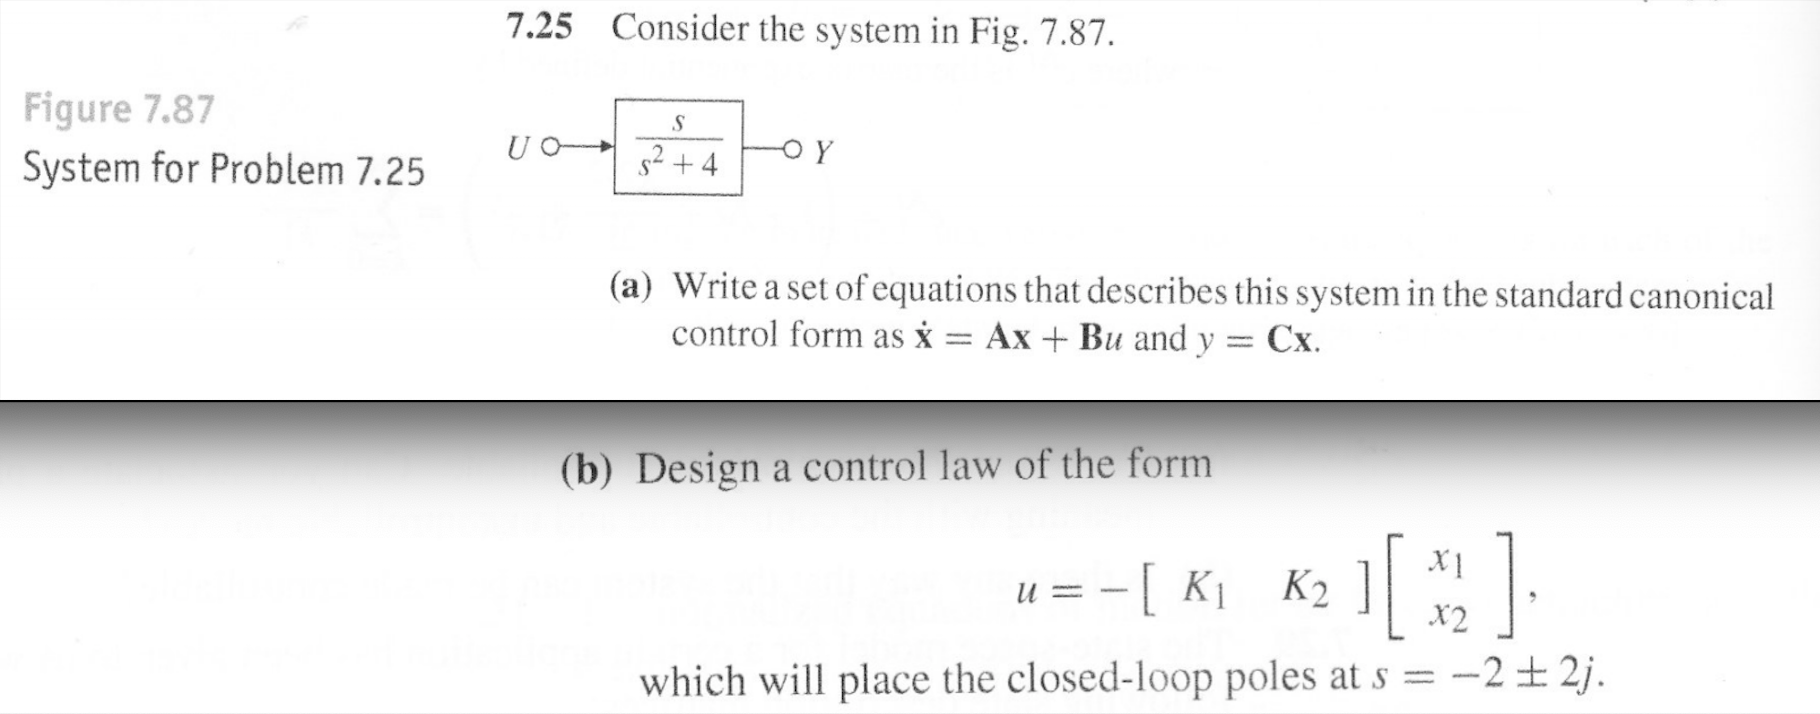 Consider the system in Fig. 7.87.
7.25
Figure 7.87
System for Problem 7.25
-o Y
s2+4
(a) Write a set of equations that describes this system in the standard canonical
control form as x = AxBu and y Cx
(b) Design a control law of the form
u
Ki K2
2j
which will place the closed-loop poles at s= -2
